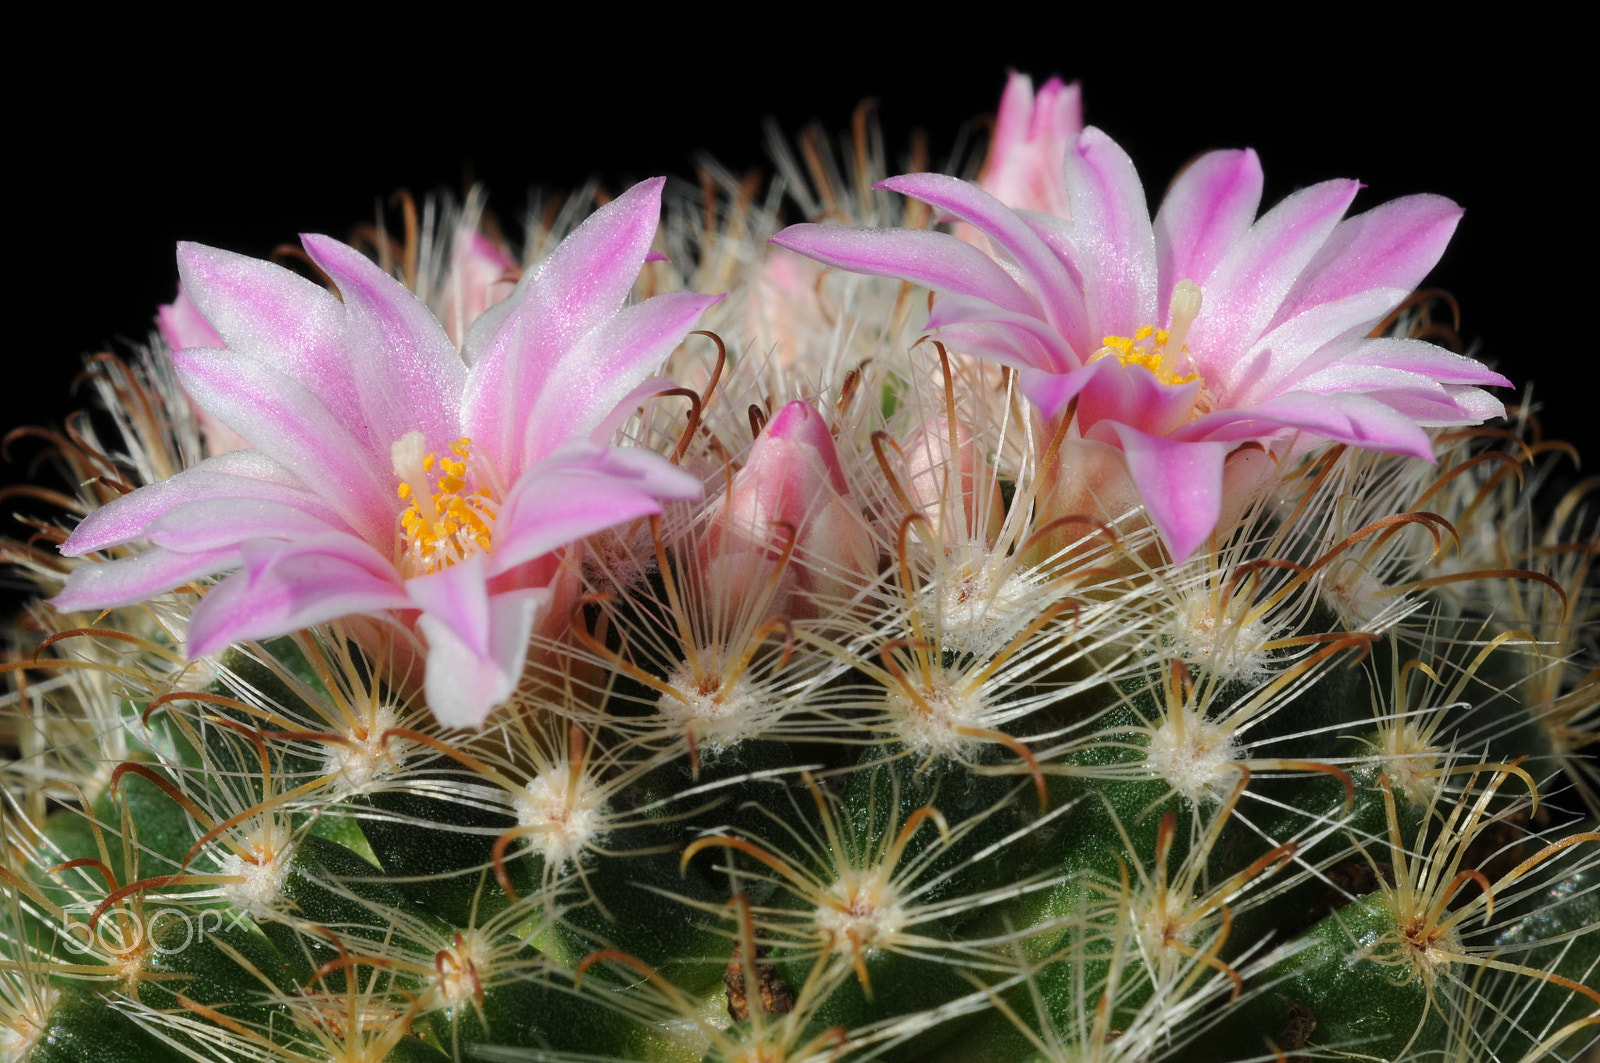 Nikon D300 + AF Micro-Nikkor 60mm f/2.8 sample photo. A cactus in the greenhouse photography